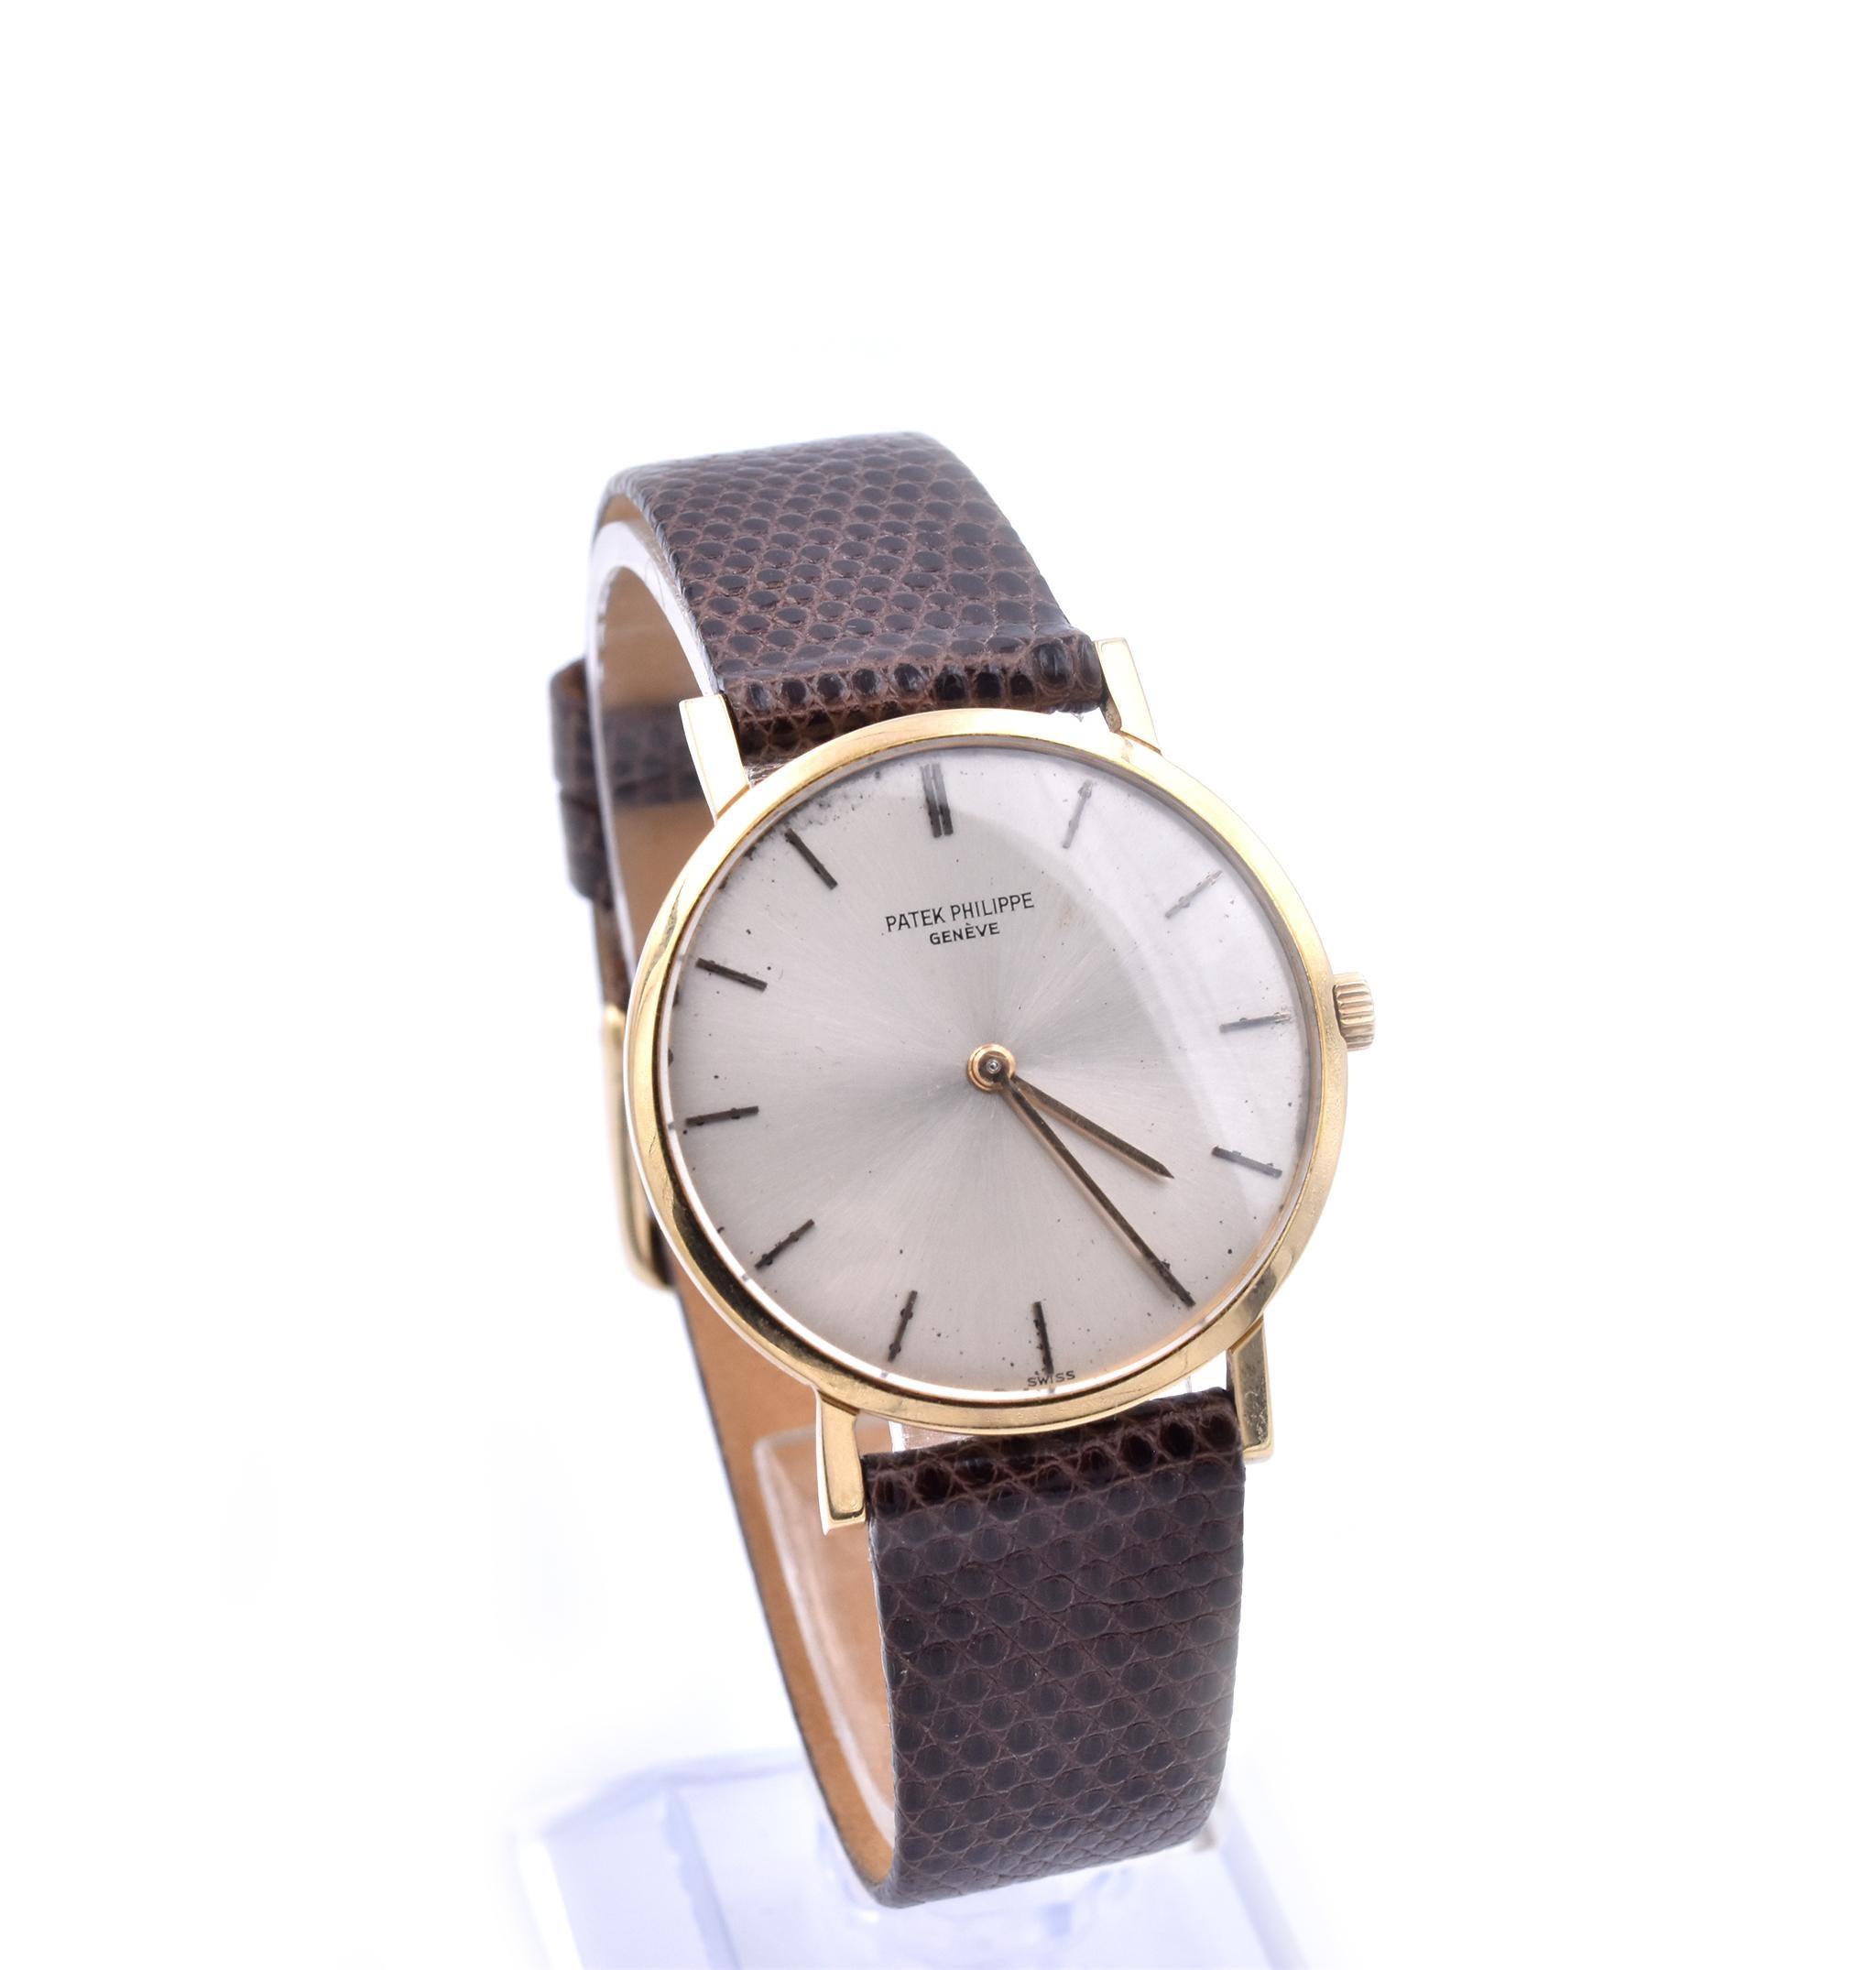 Movement: Mechanical
Function: hours, minutes, date
Case: 34mm 18k yellow gold, sapphire protective crystal, push/pull crown
Dial: Silver stick dial, gold hands, 
Band: 16R generic genuine lizard dark brown strap 
Serial #: 315XXX
Reference #: 3512
